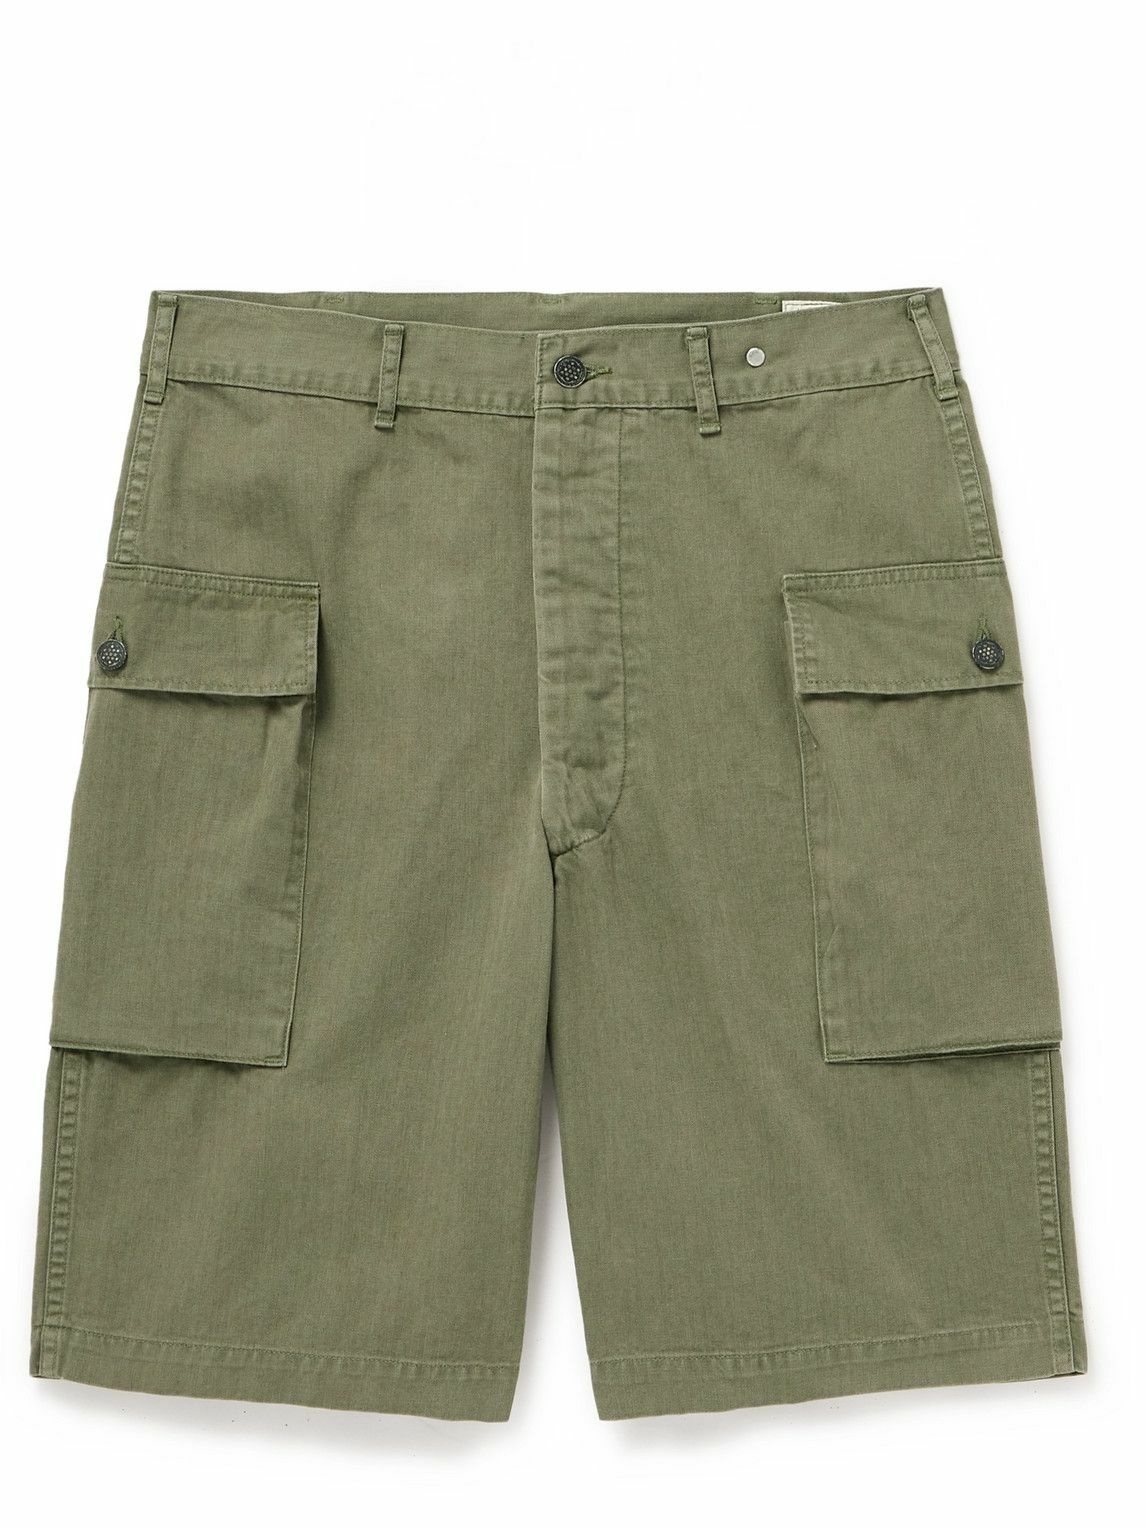 OrSlow - US Army Cotton-Herringbone Shorts - Green orSlow